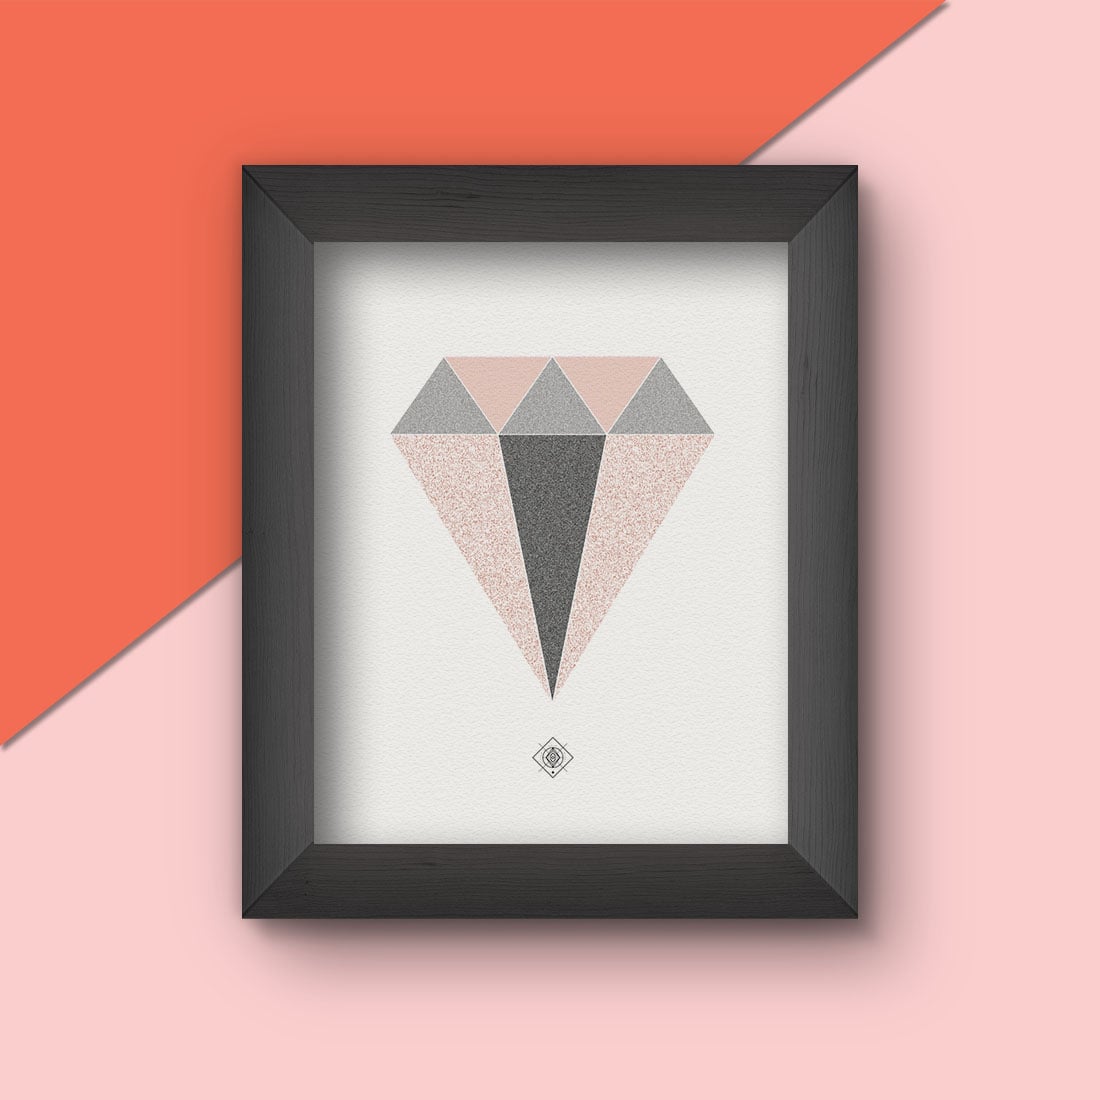 Geometric Diamond Free Printable • Little Gold Pixel • Download this diamond free printable as part of my Freebie Friday series. Instant wall art! Bonus: watch the time-lapse video to see how I made it.